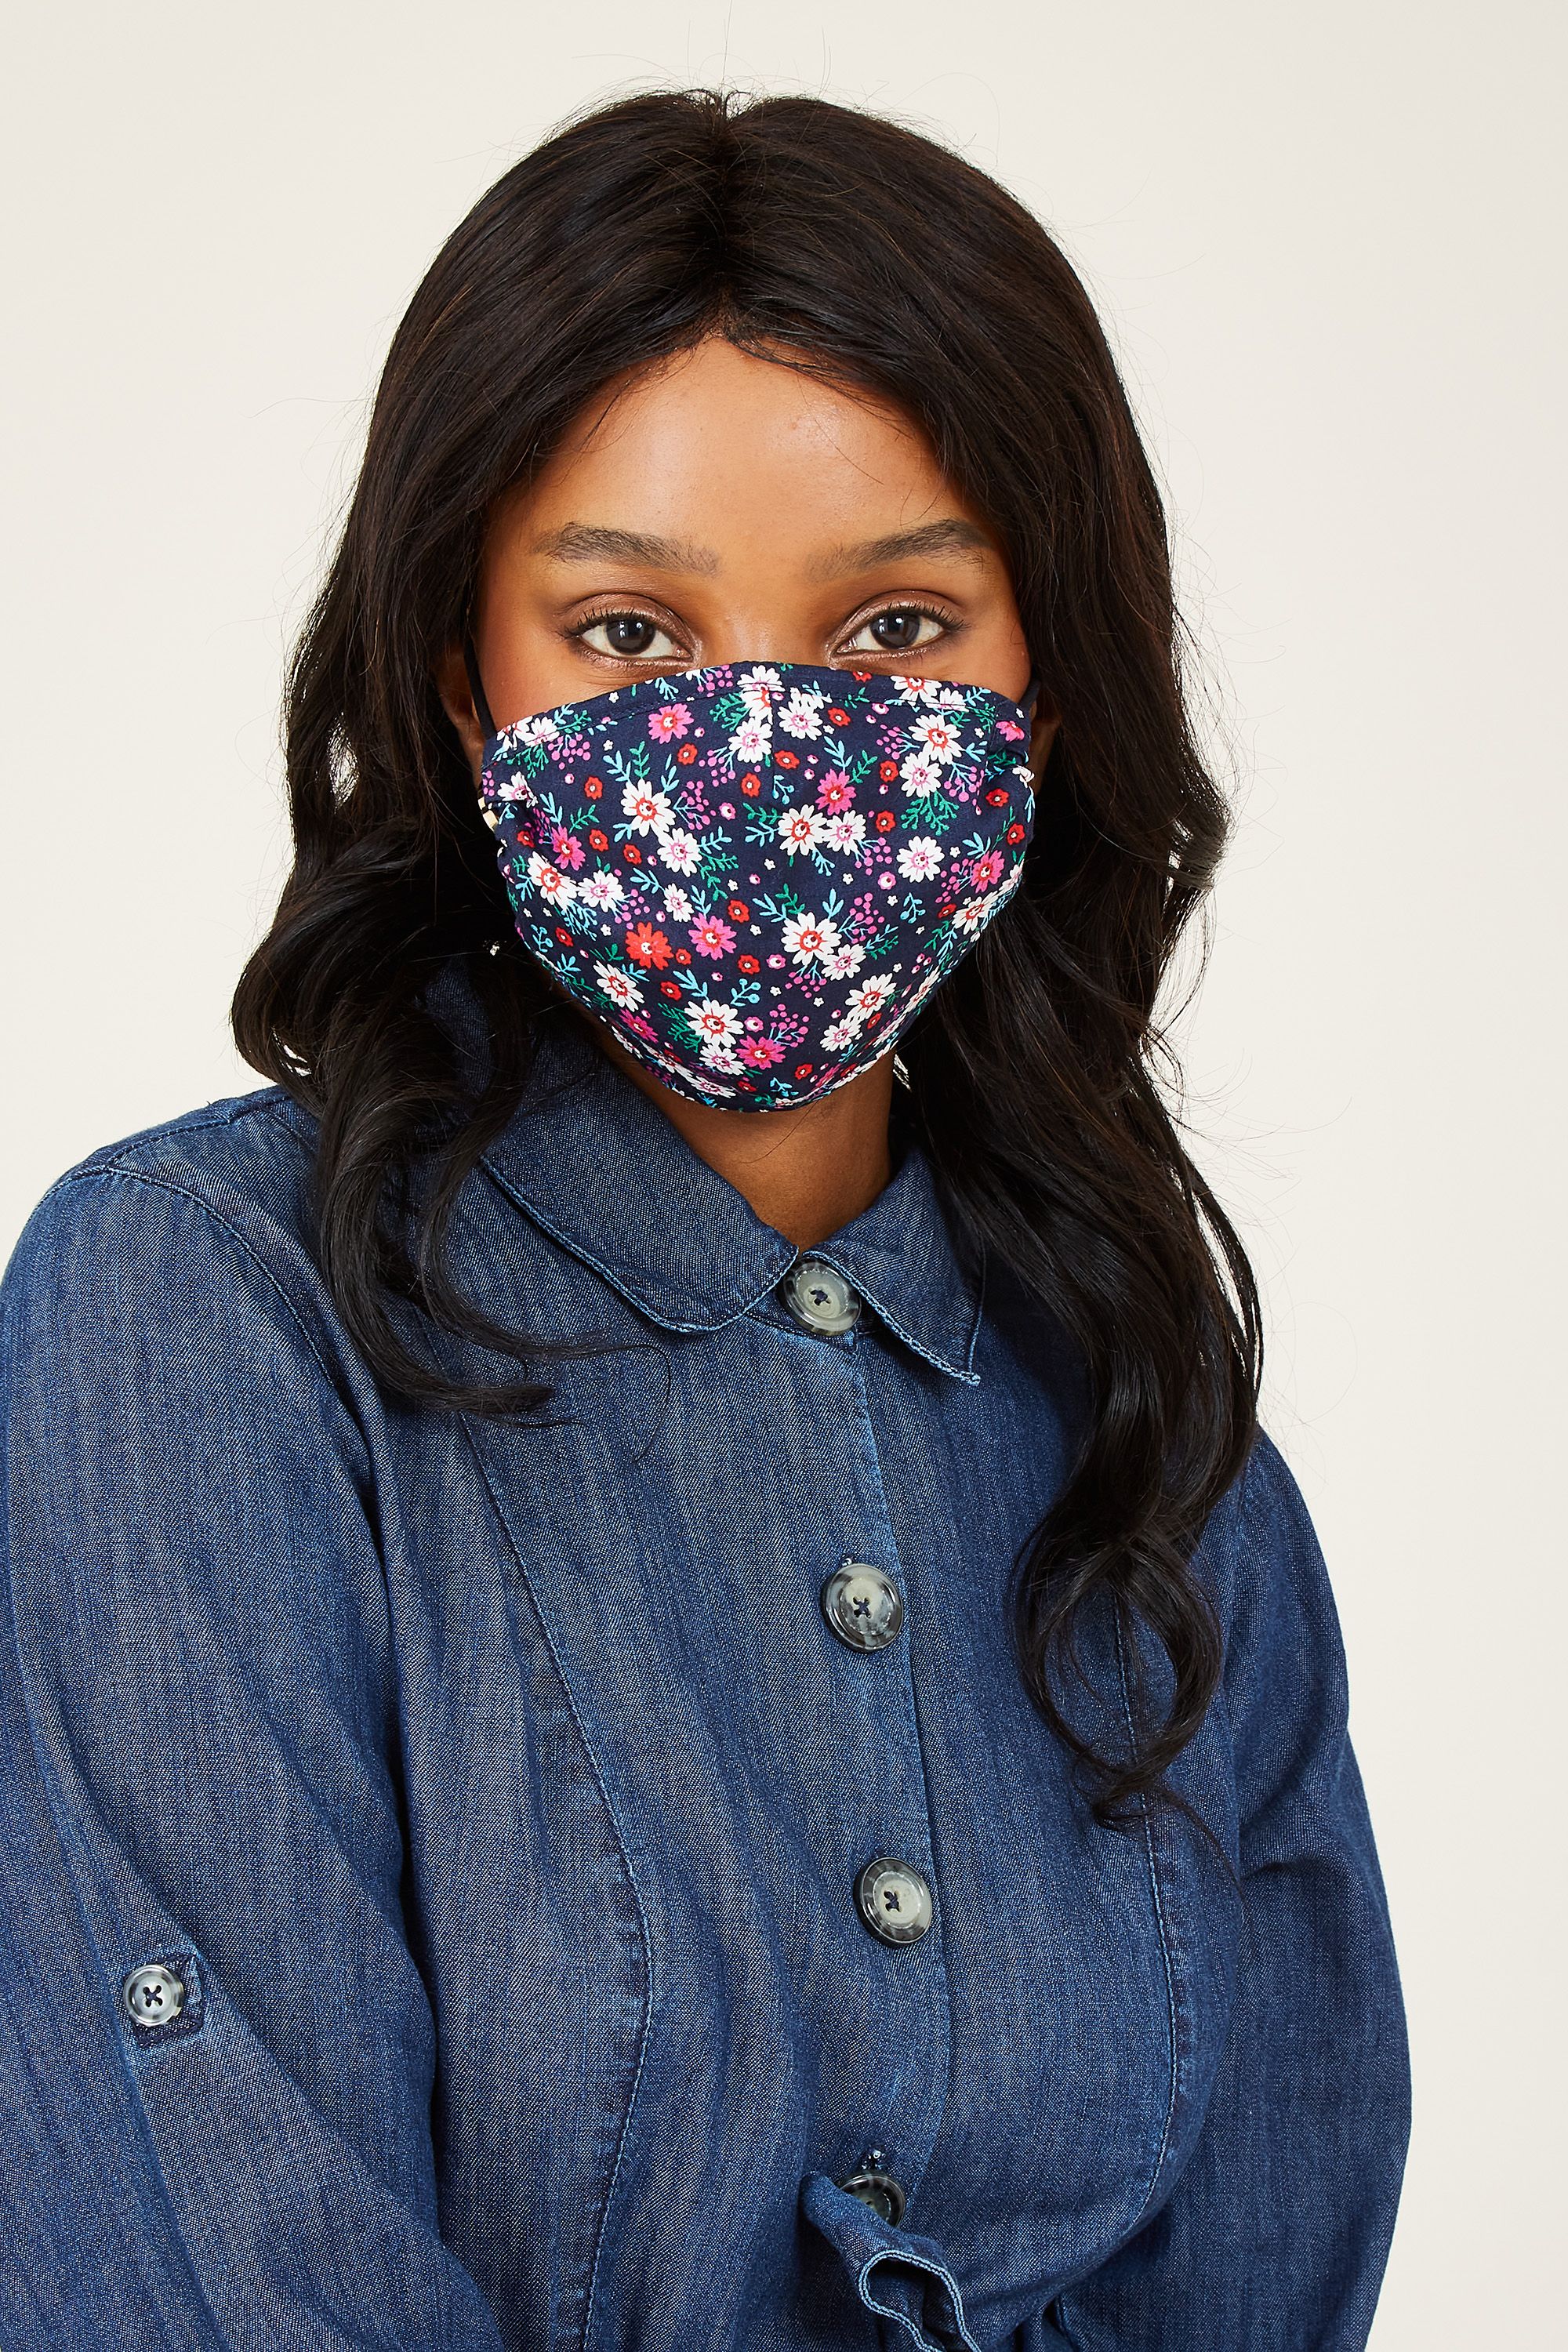 With a choice of three fun designs, our Flower Face Covering 3 pack is a versatile choice. Made from super-soft cotton, each face covering is cut from the ends of our fabric rolls, so they are sustainable and kind to the planet. Please remember these are non-medical masks and not PPE. Wash your hands before and after putting on the covering. One Pound from each covering is donated to Sufra, a charity that supports and provides food for people in extreme poverty.